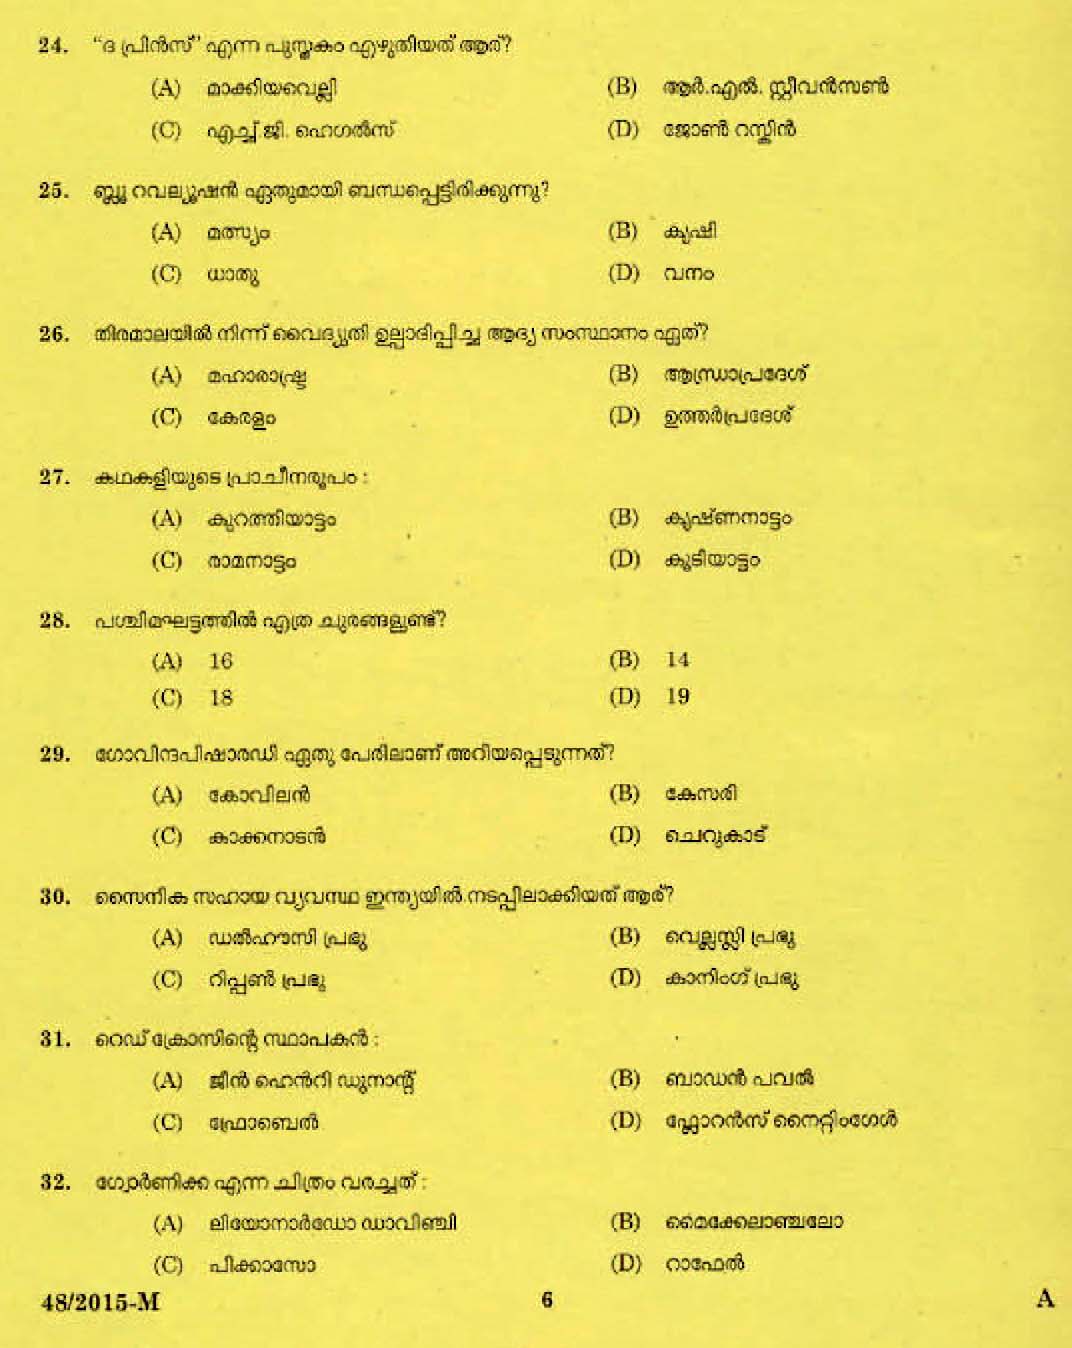 LD Clerk Bill Collector Question Paper Malayalam 2015 Paper Code 482015 M 4